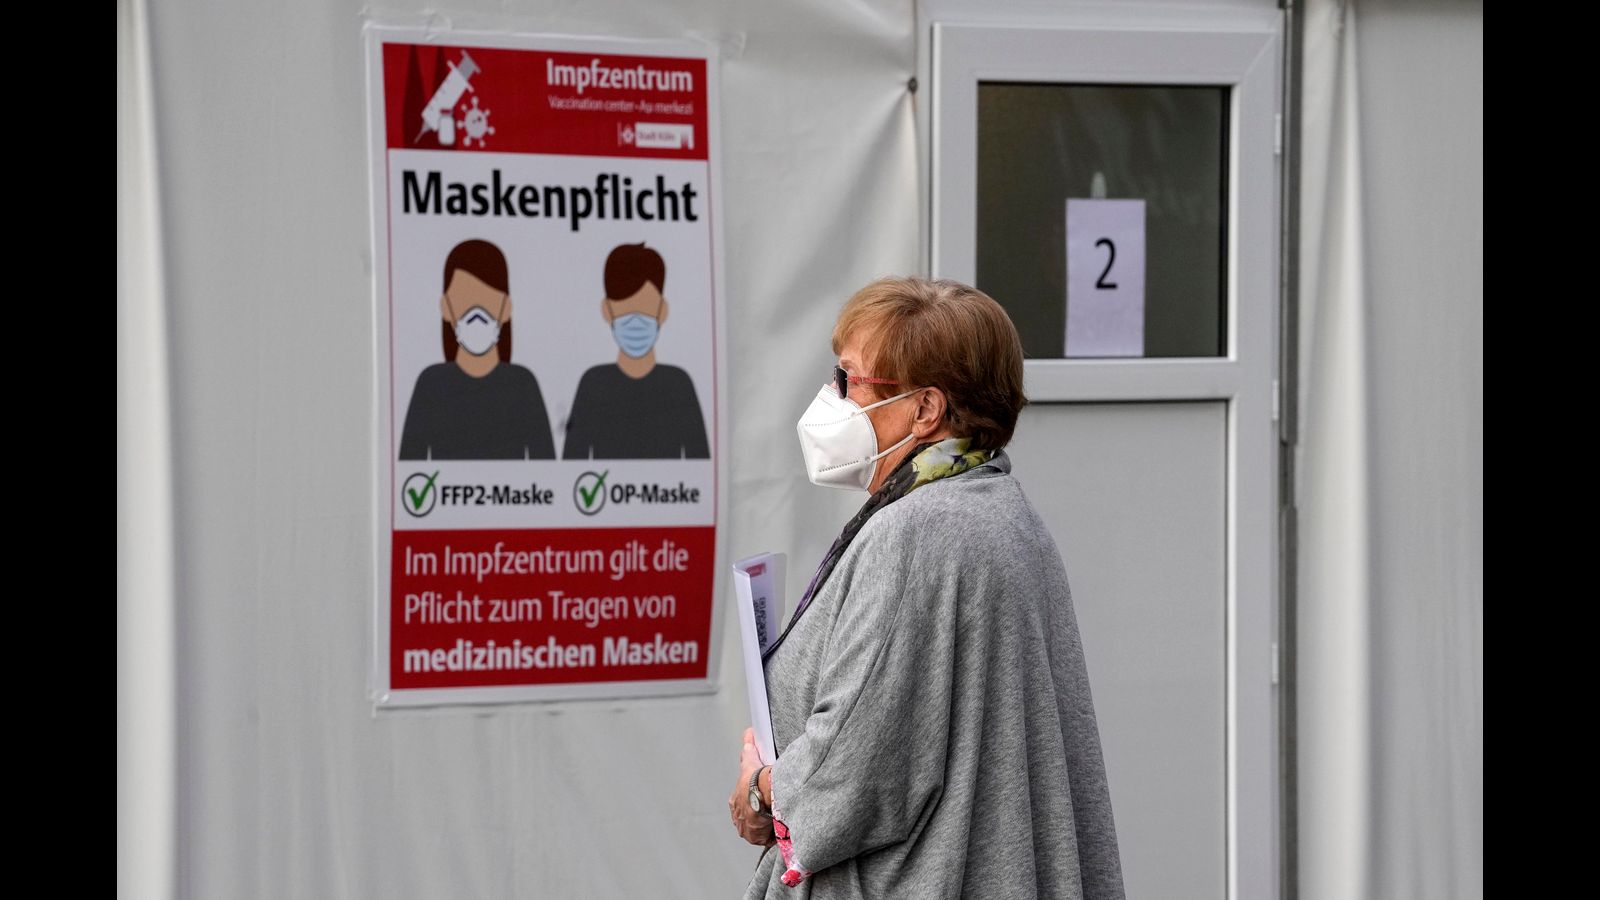 Surplus in German retirement funds testifies to high excess mortality from pandemic